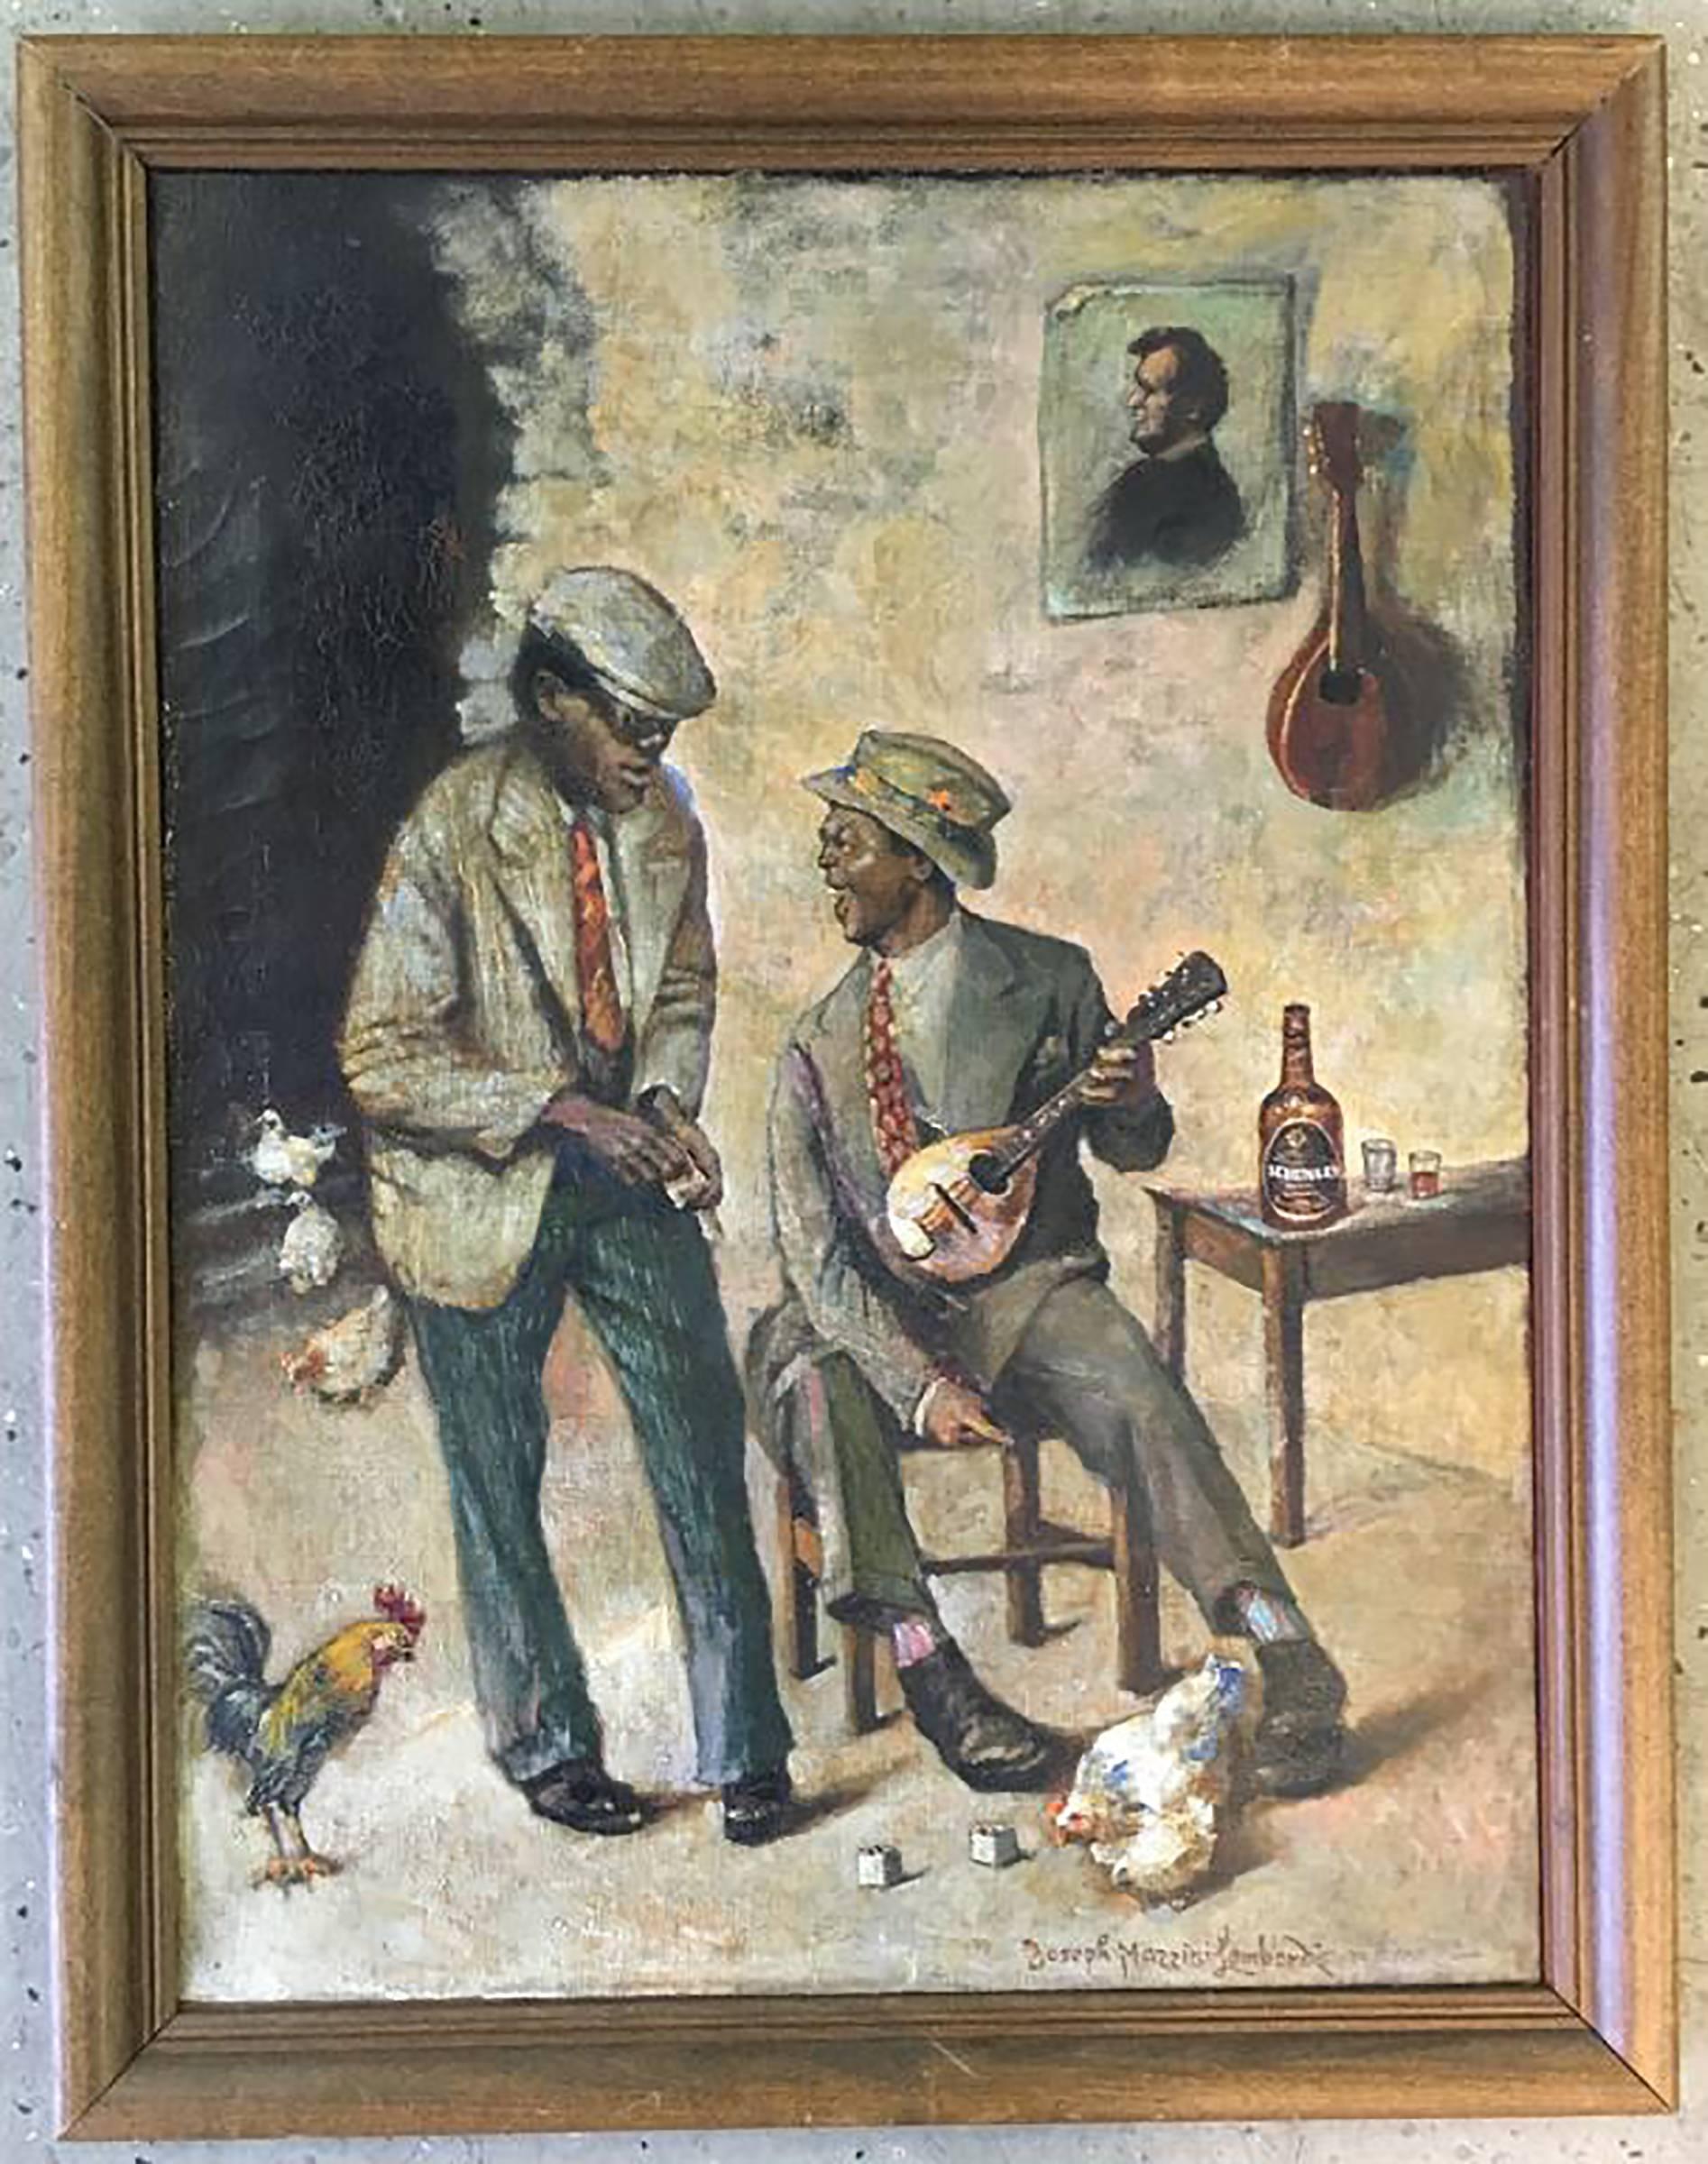 Two 1930's African American Men Shooting Craps - Painting by Joseph Mazzini Lombardi